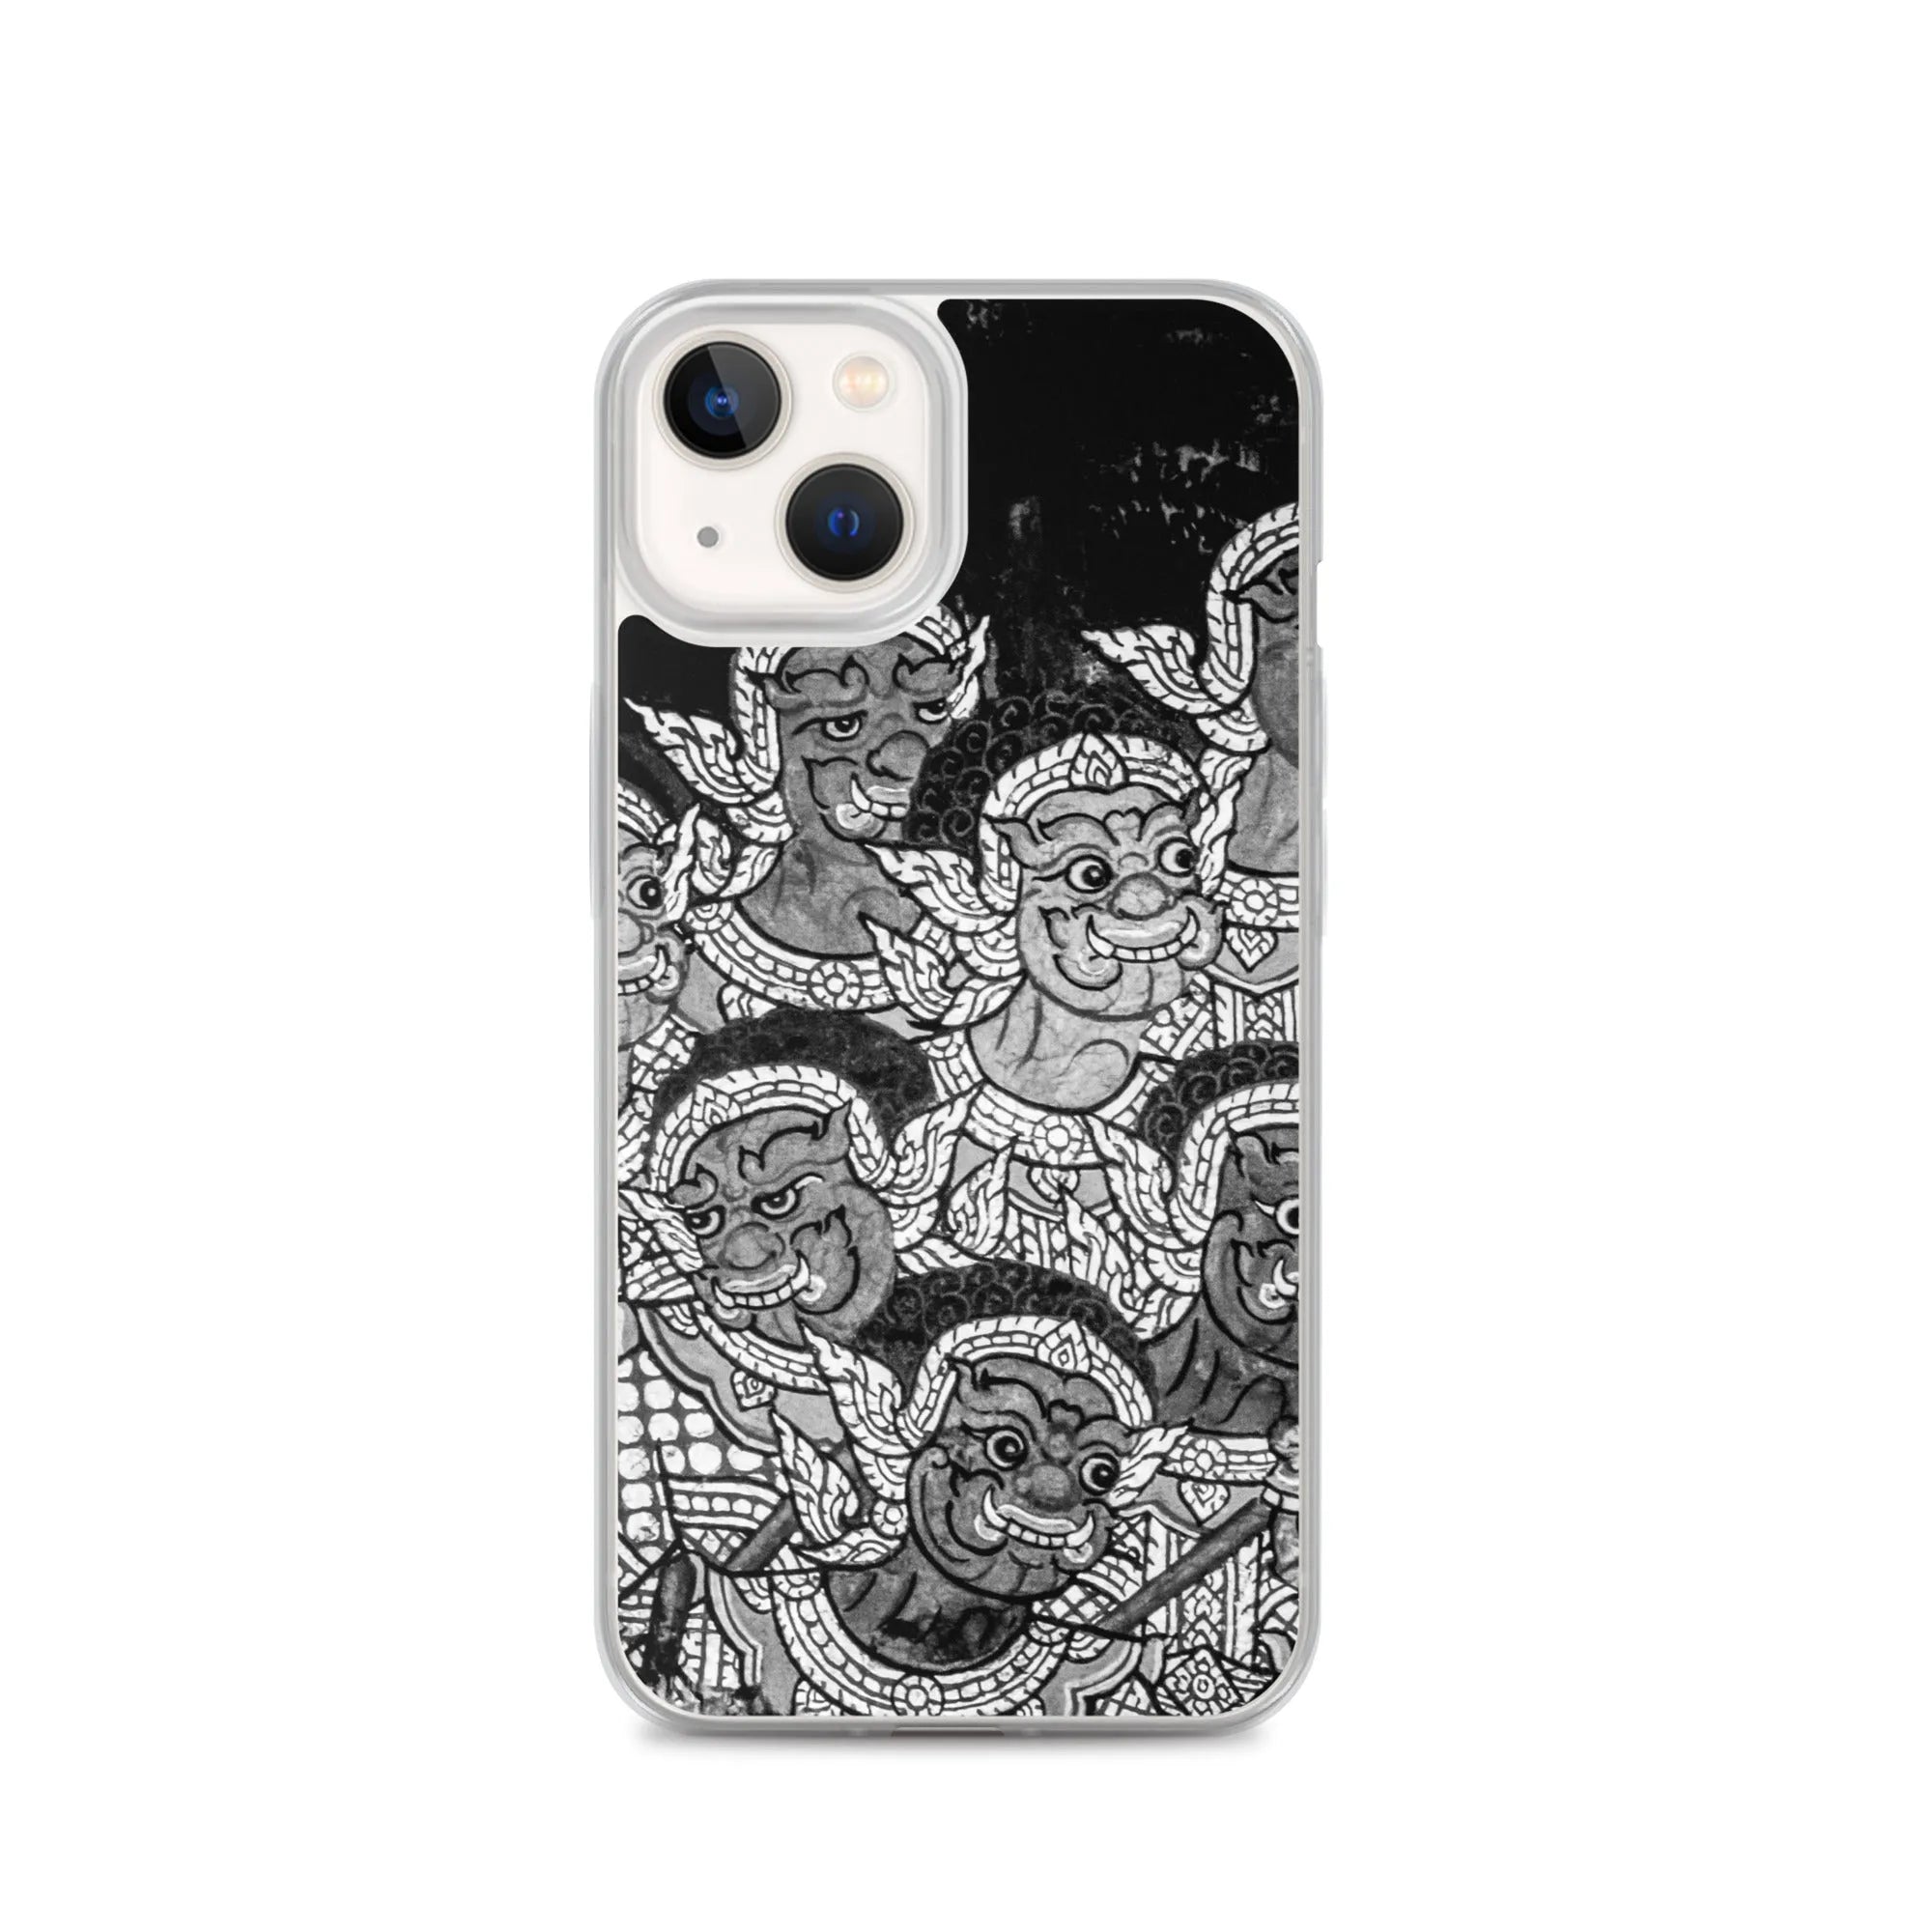 Babes In The Woods - Designer Travels Art Iphone Case -  black And White - Iphone 13 - Mobile Phone Cases - Aesthetic